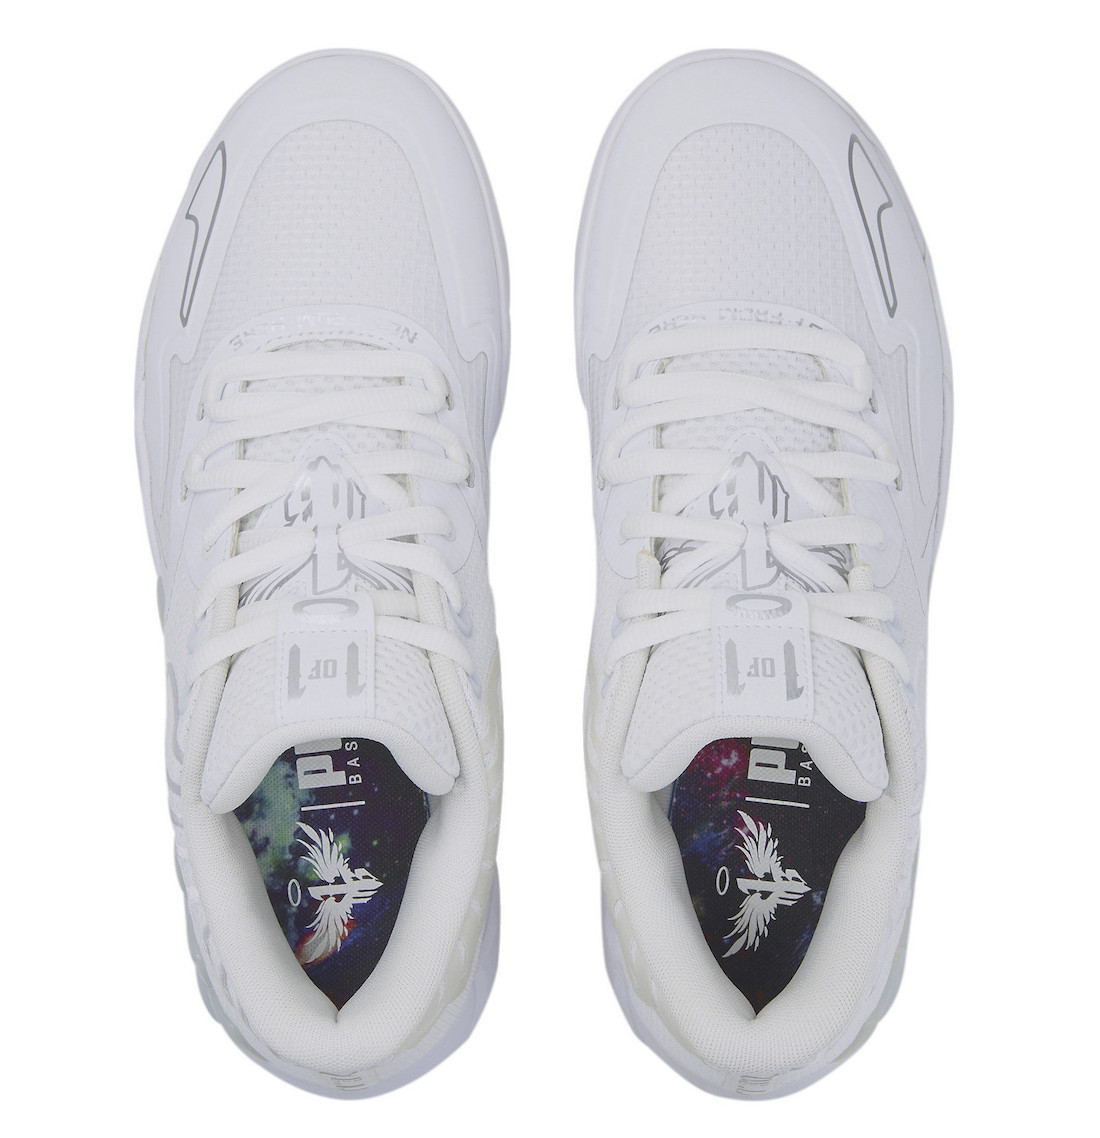 PUMA MB 01 Low White 376941-04 Release Date